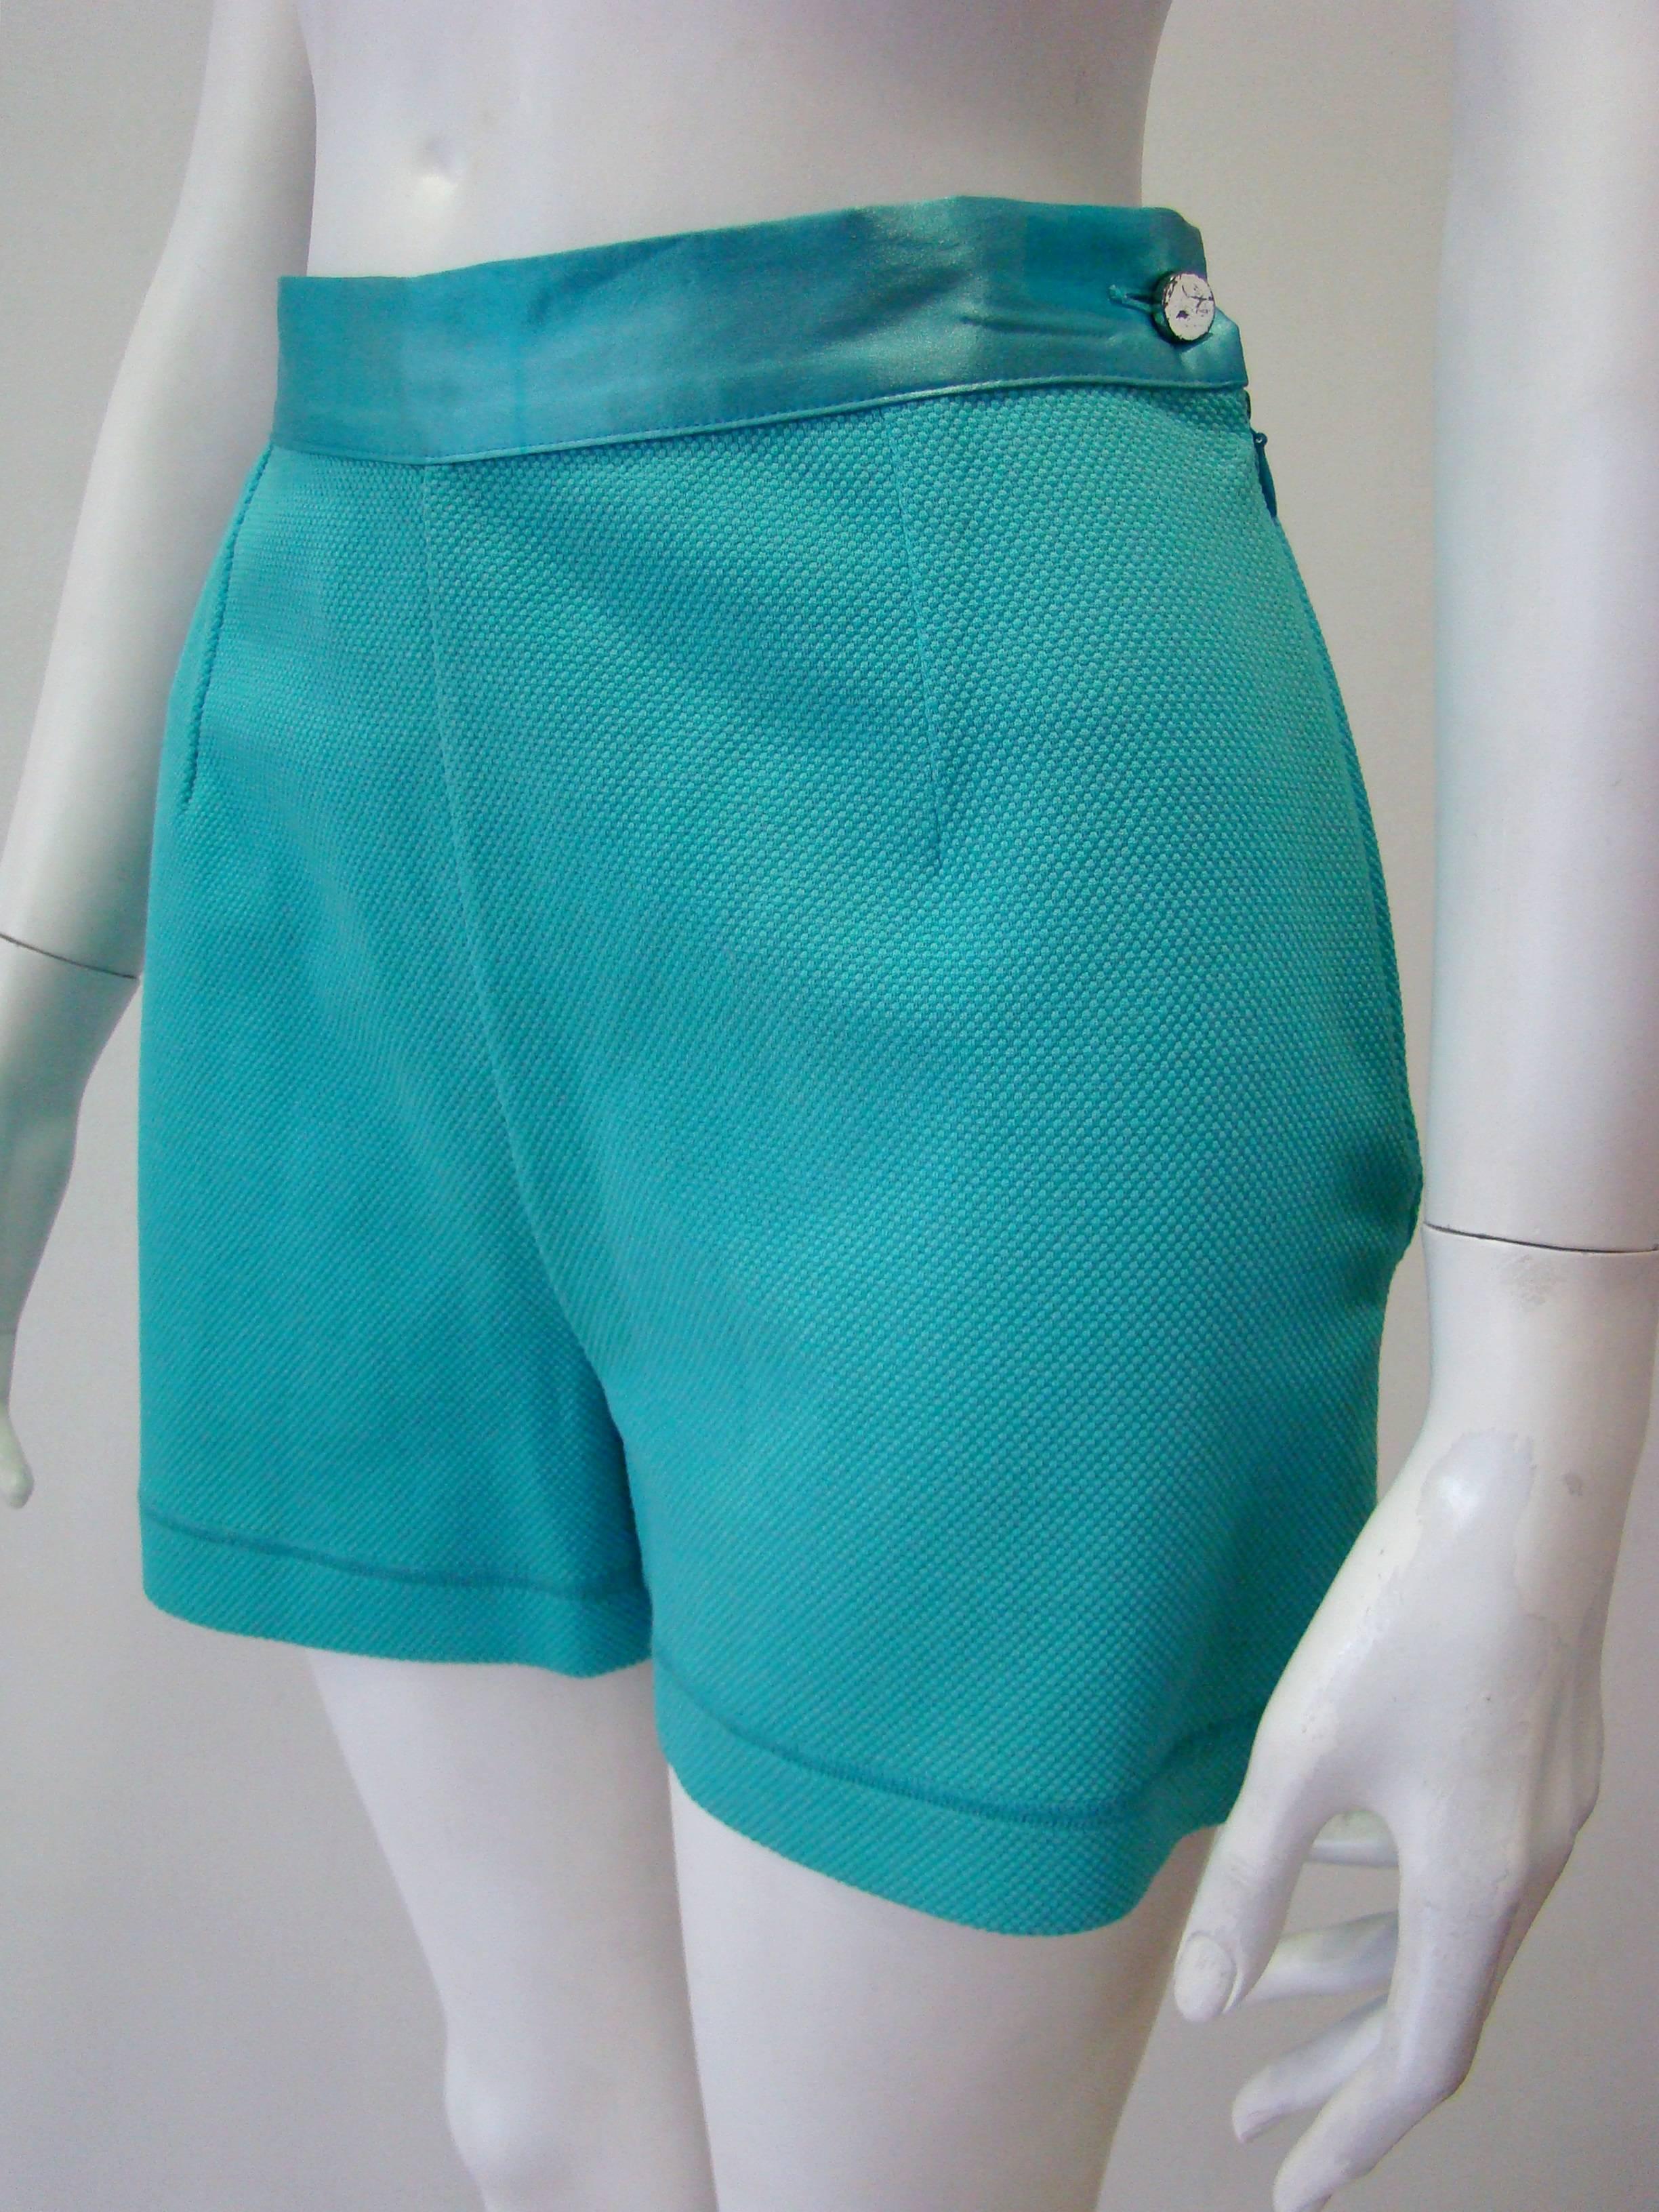 Gianfranco Ferre Turquoise Shorts In Good Condition For Sale In Athens, Agia Paraskevi